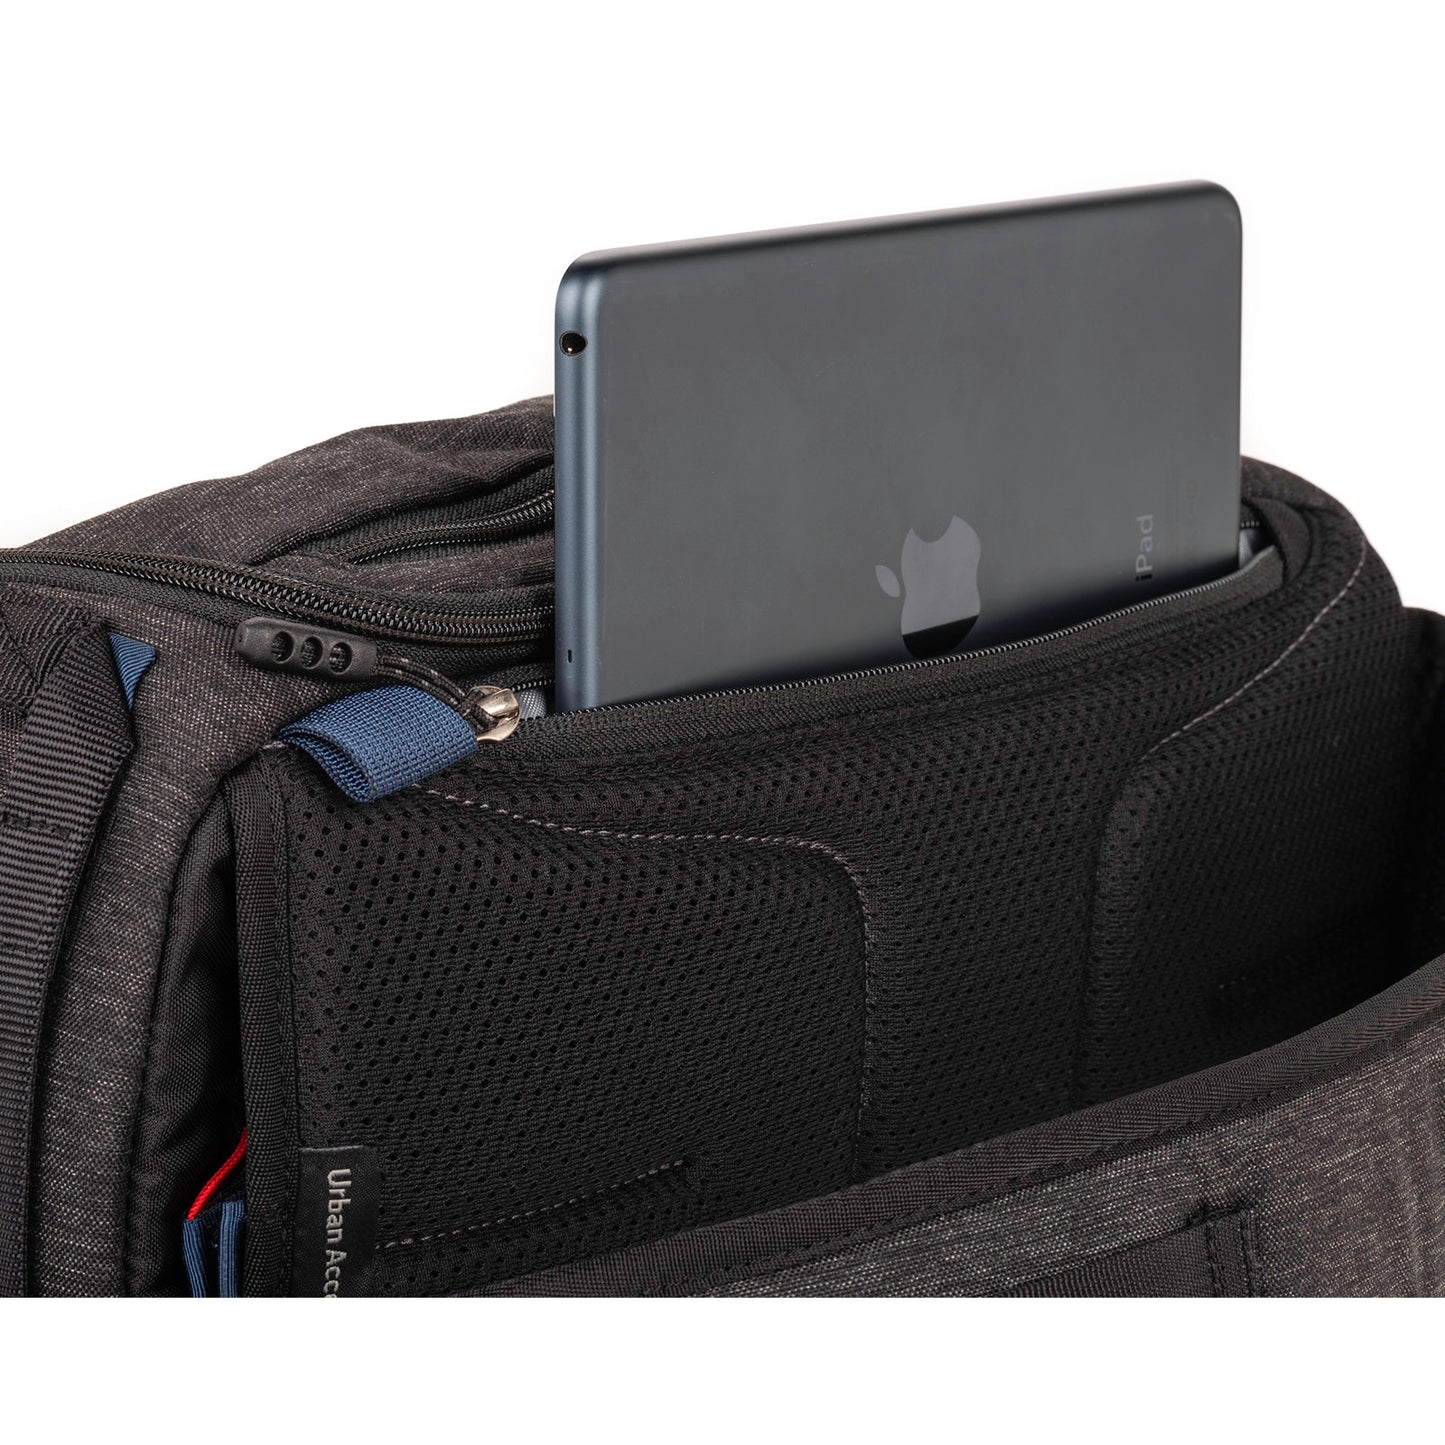 
                  
                    Dedicated tablet compartment fits an 8-inch tablet
                  
                